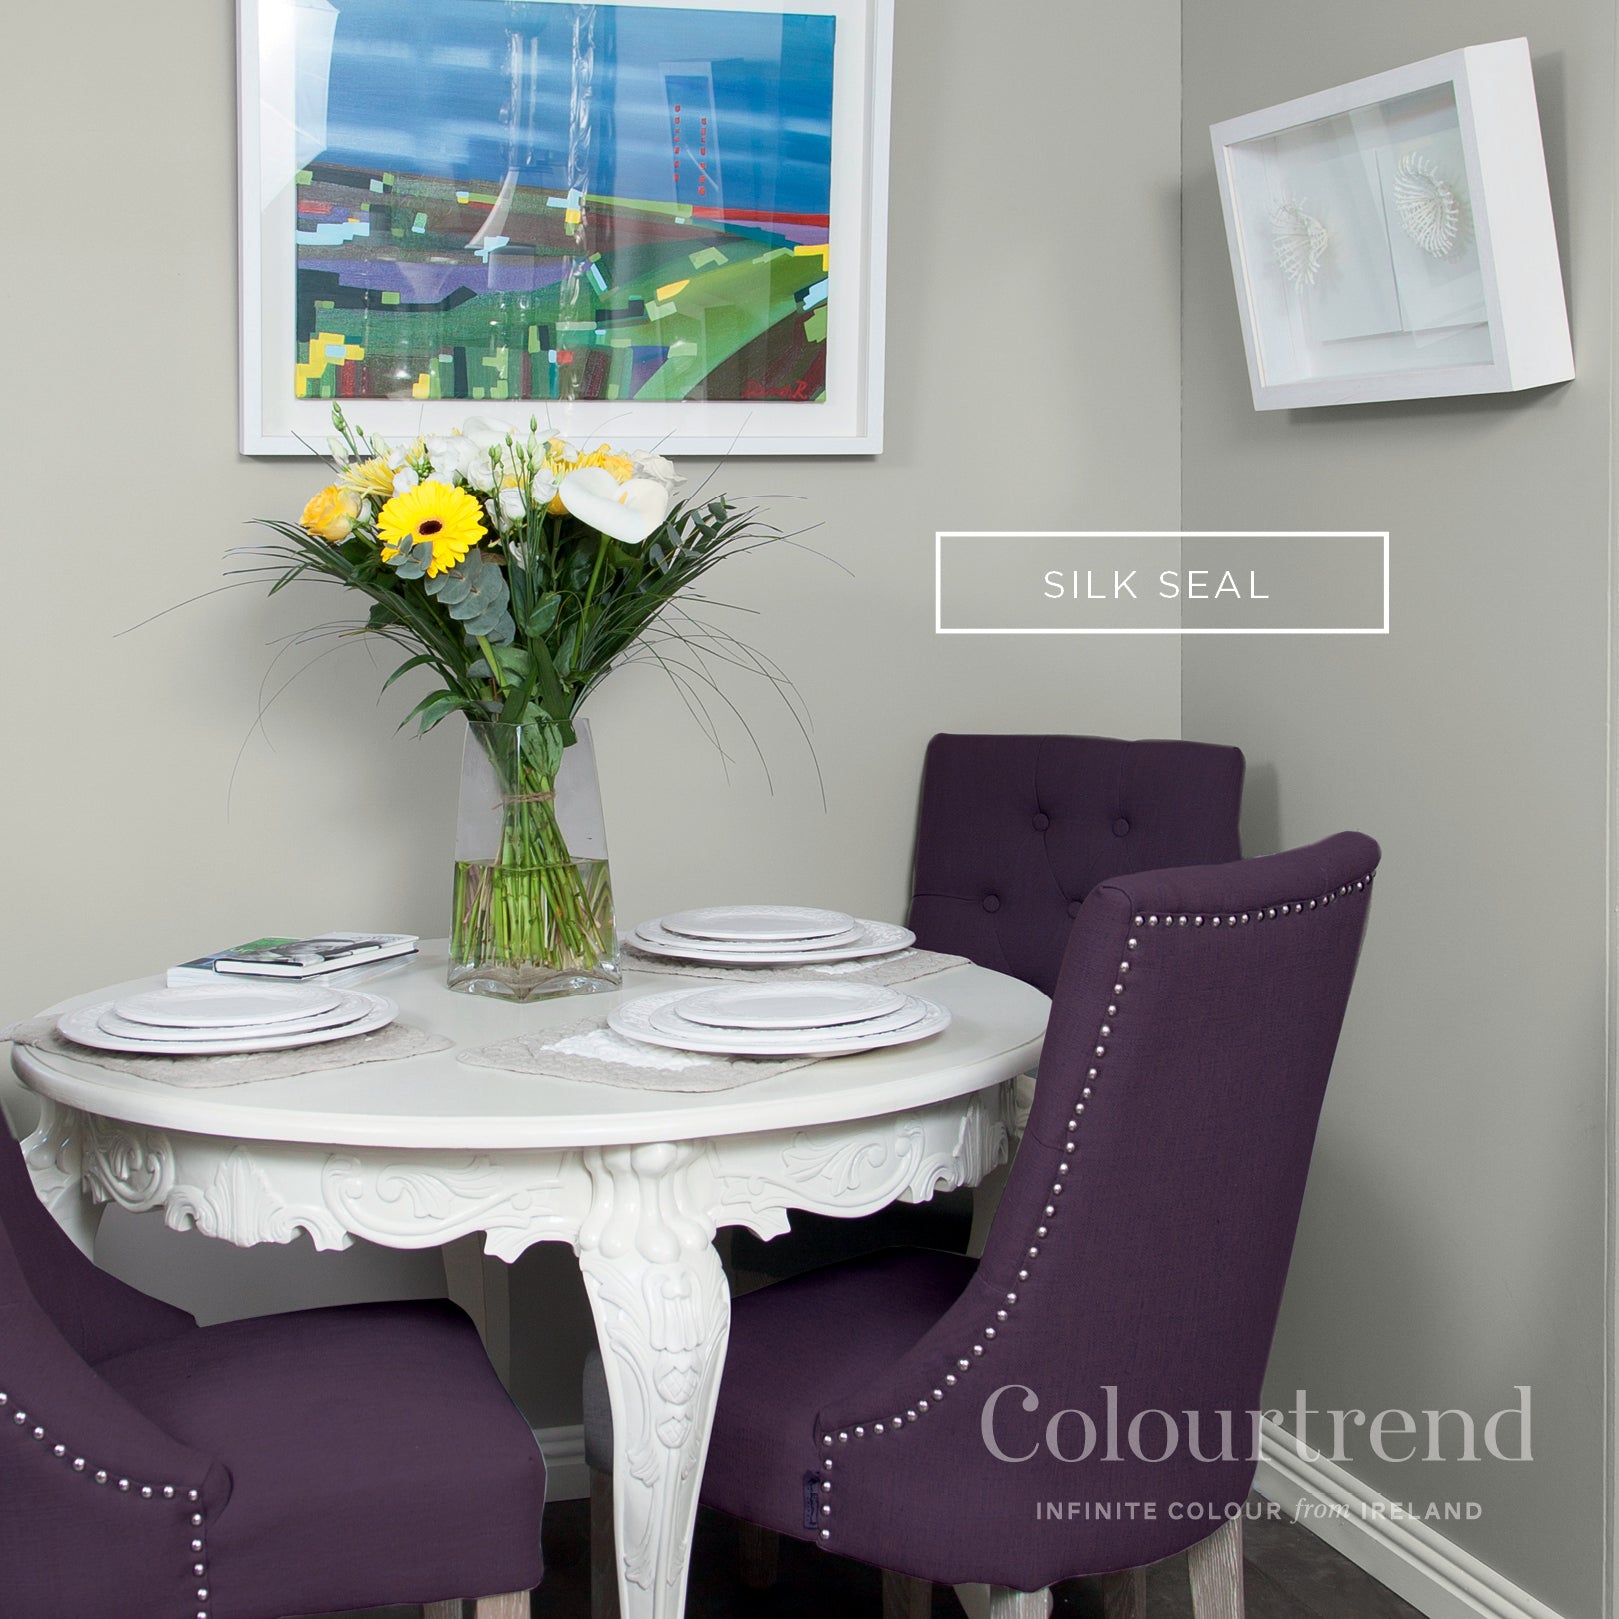 Colourtrend Silk Seal | Same Day Dublin Delivery by Weirs of Baggot St